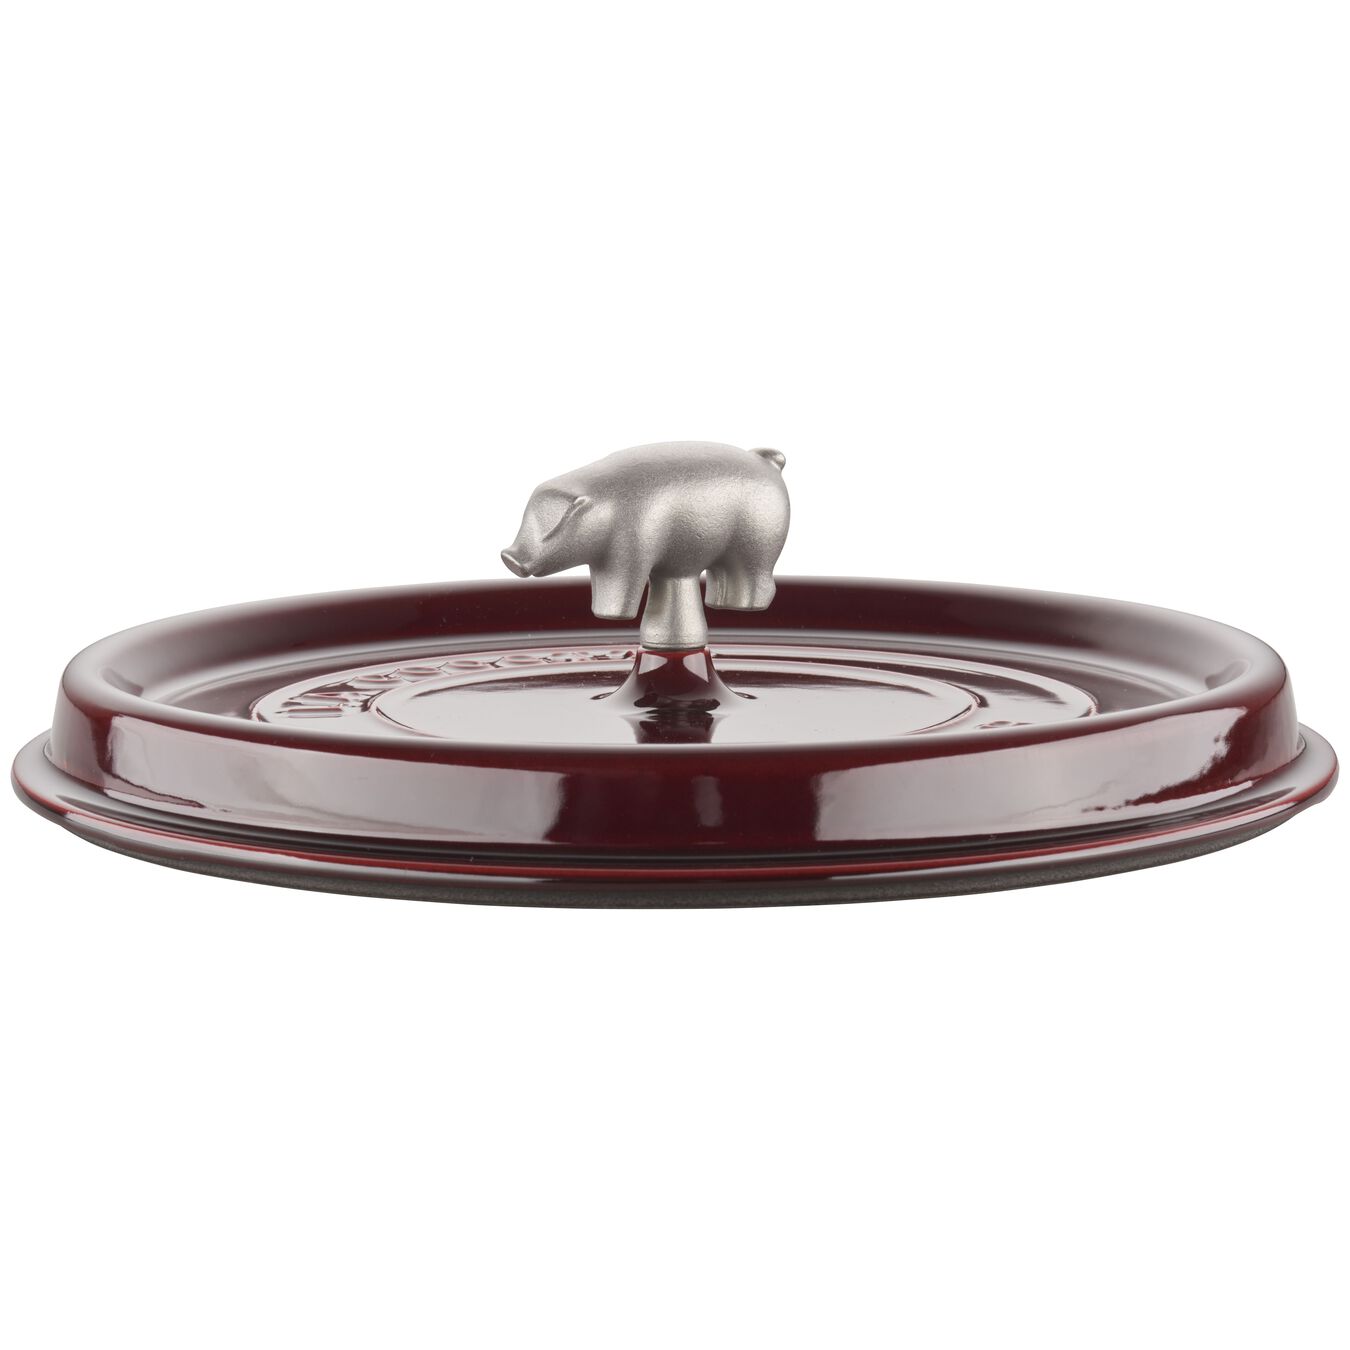 5.7 l cast iron pig Cocotte, grenadine-red - Visual Imperfections,,large 6